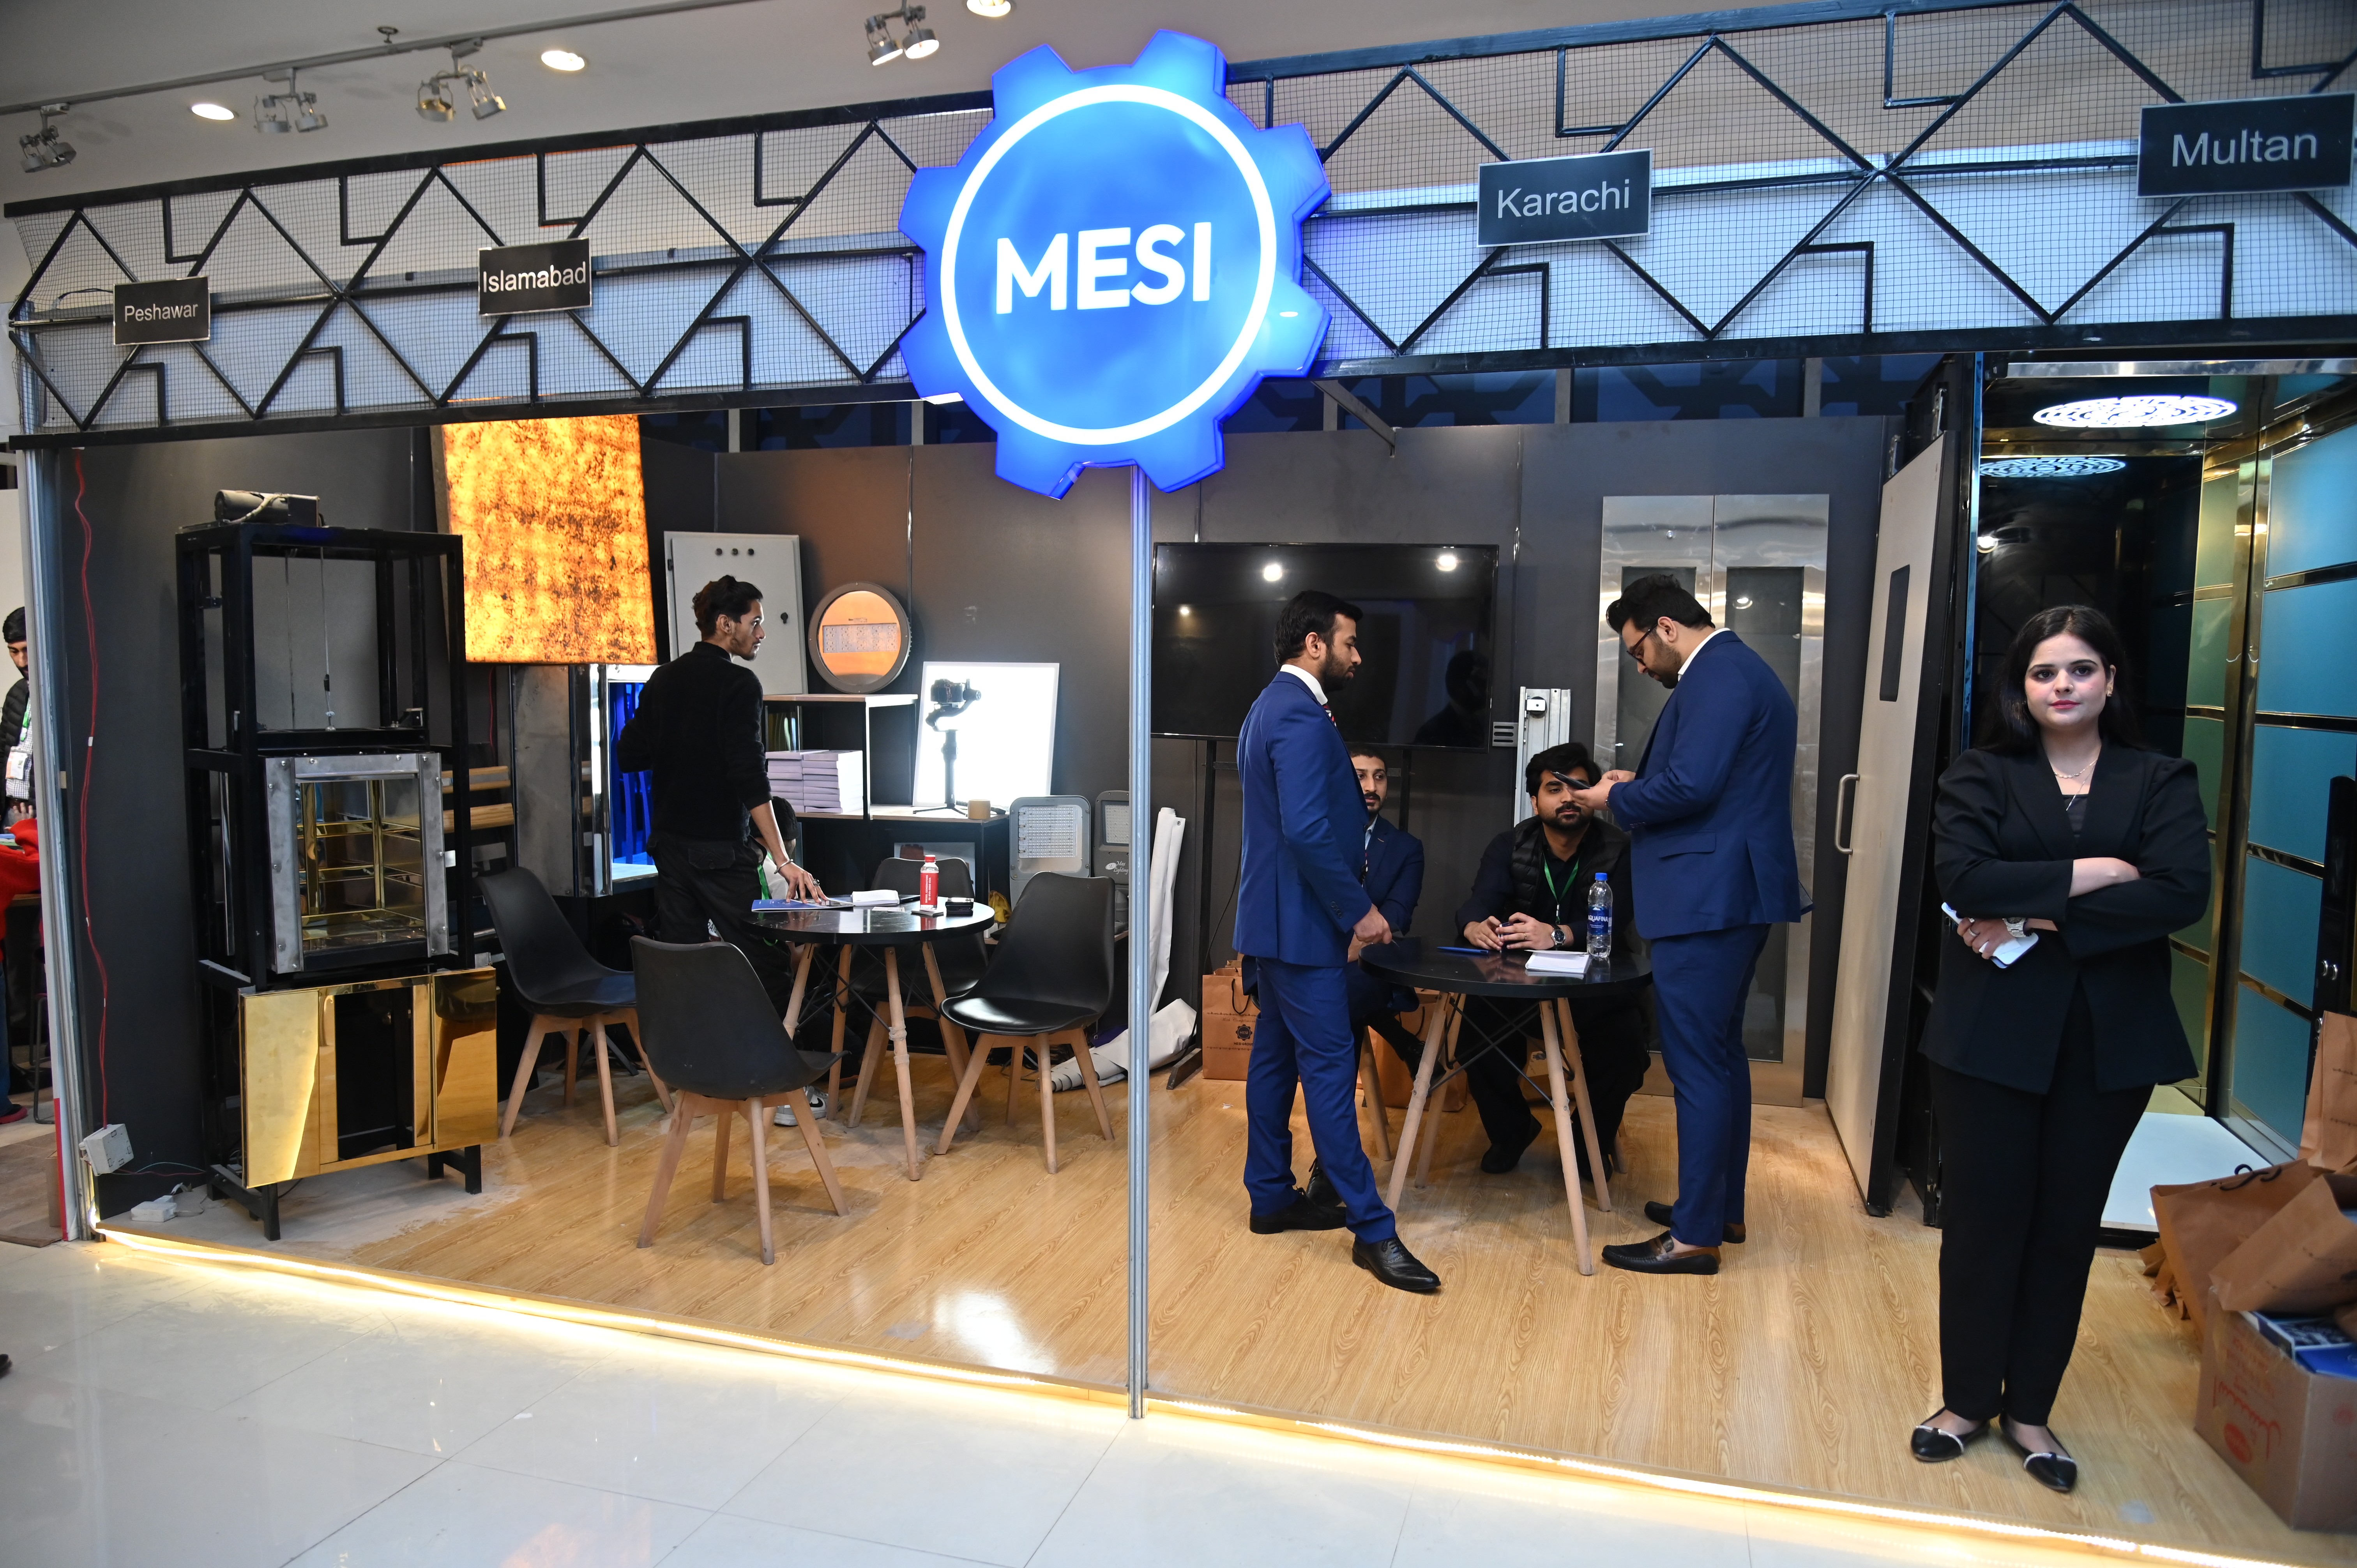 The block of Mesi at the building material Exhibition